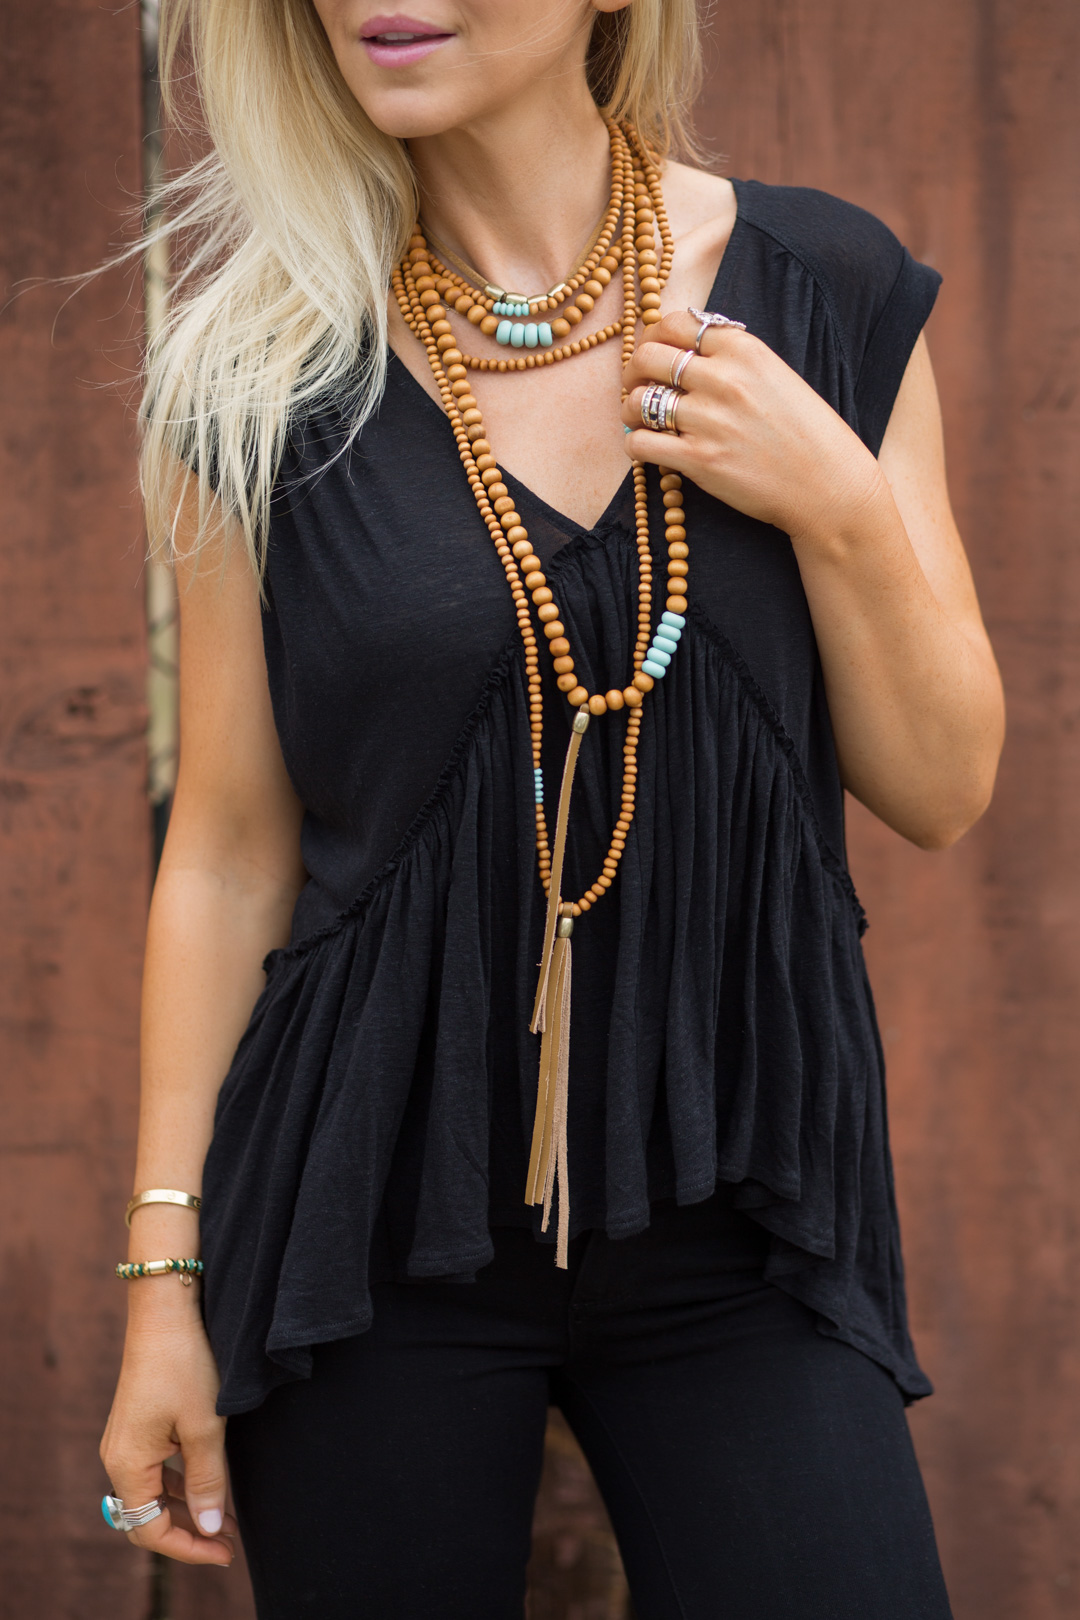 Lisa Allen of Lunchpails and Lipstick wearing all black Free People with wooden and turquoise beaded necklace